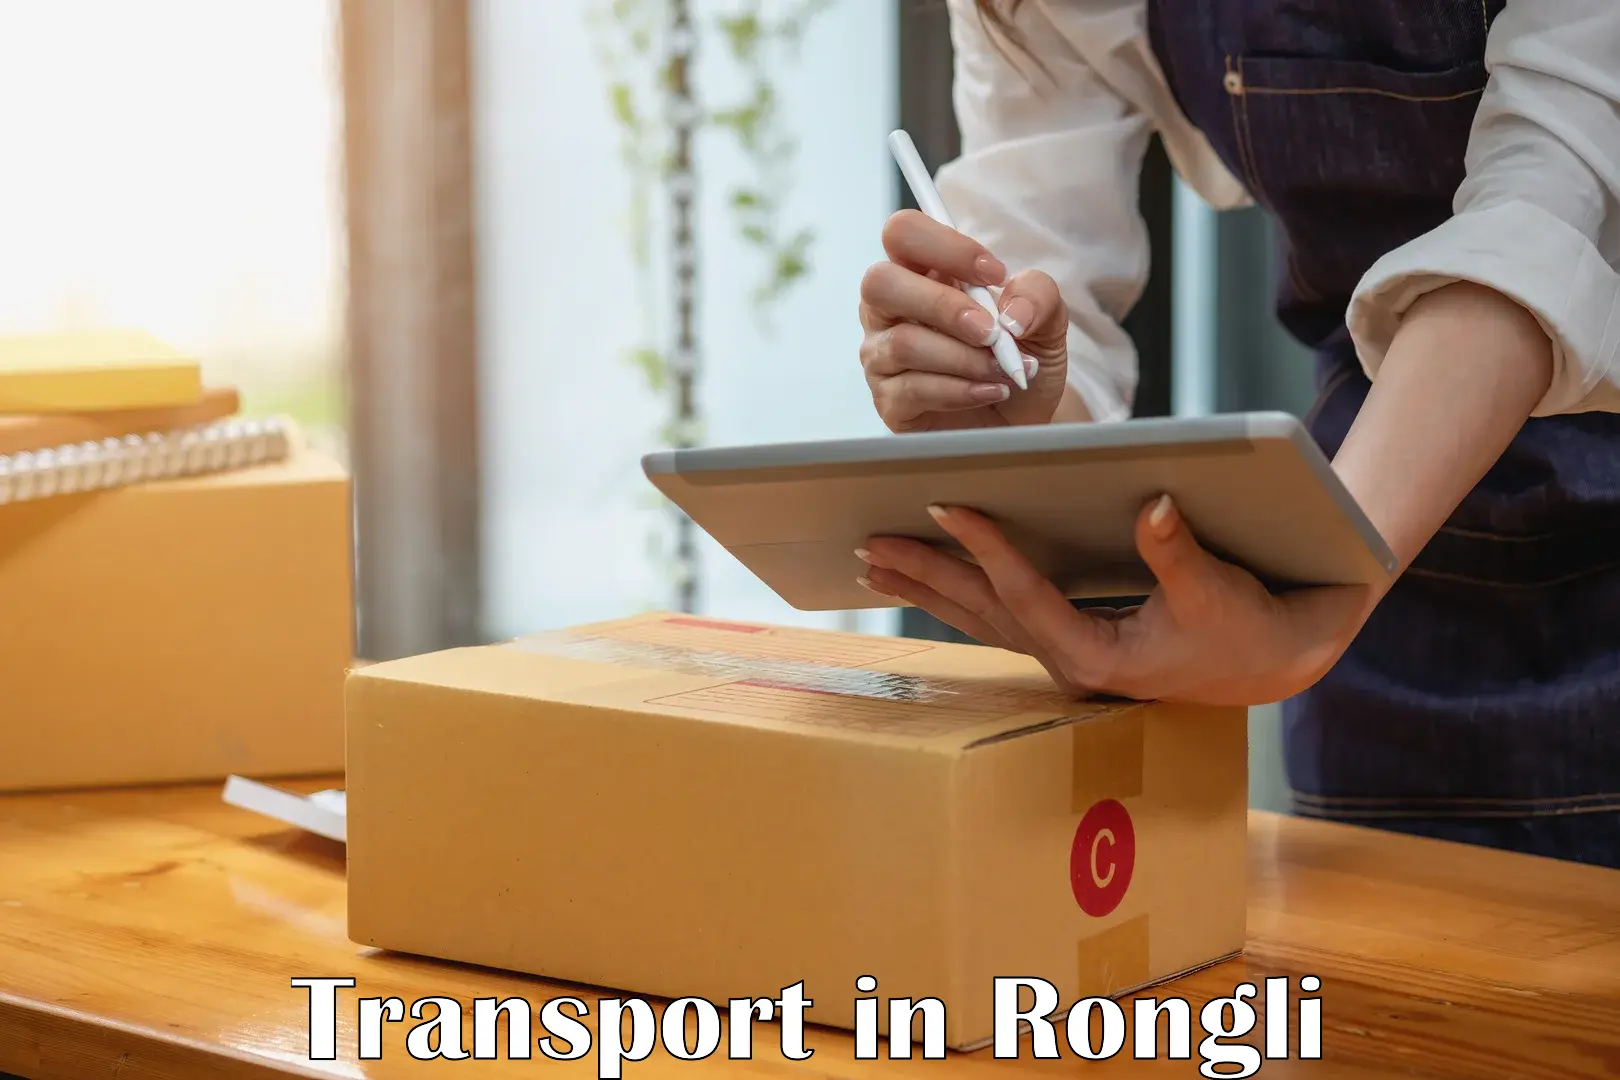 Transport in sharing in Rongli